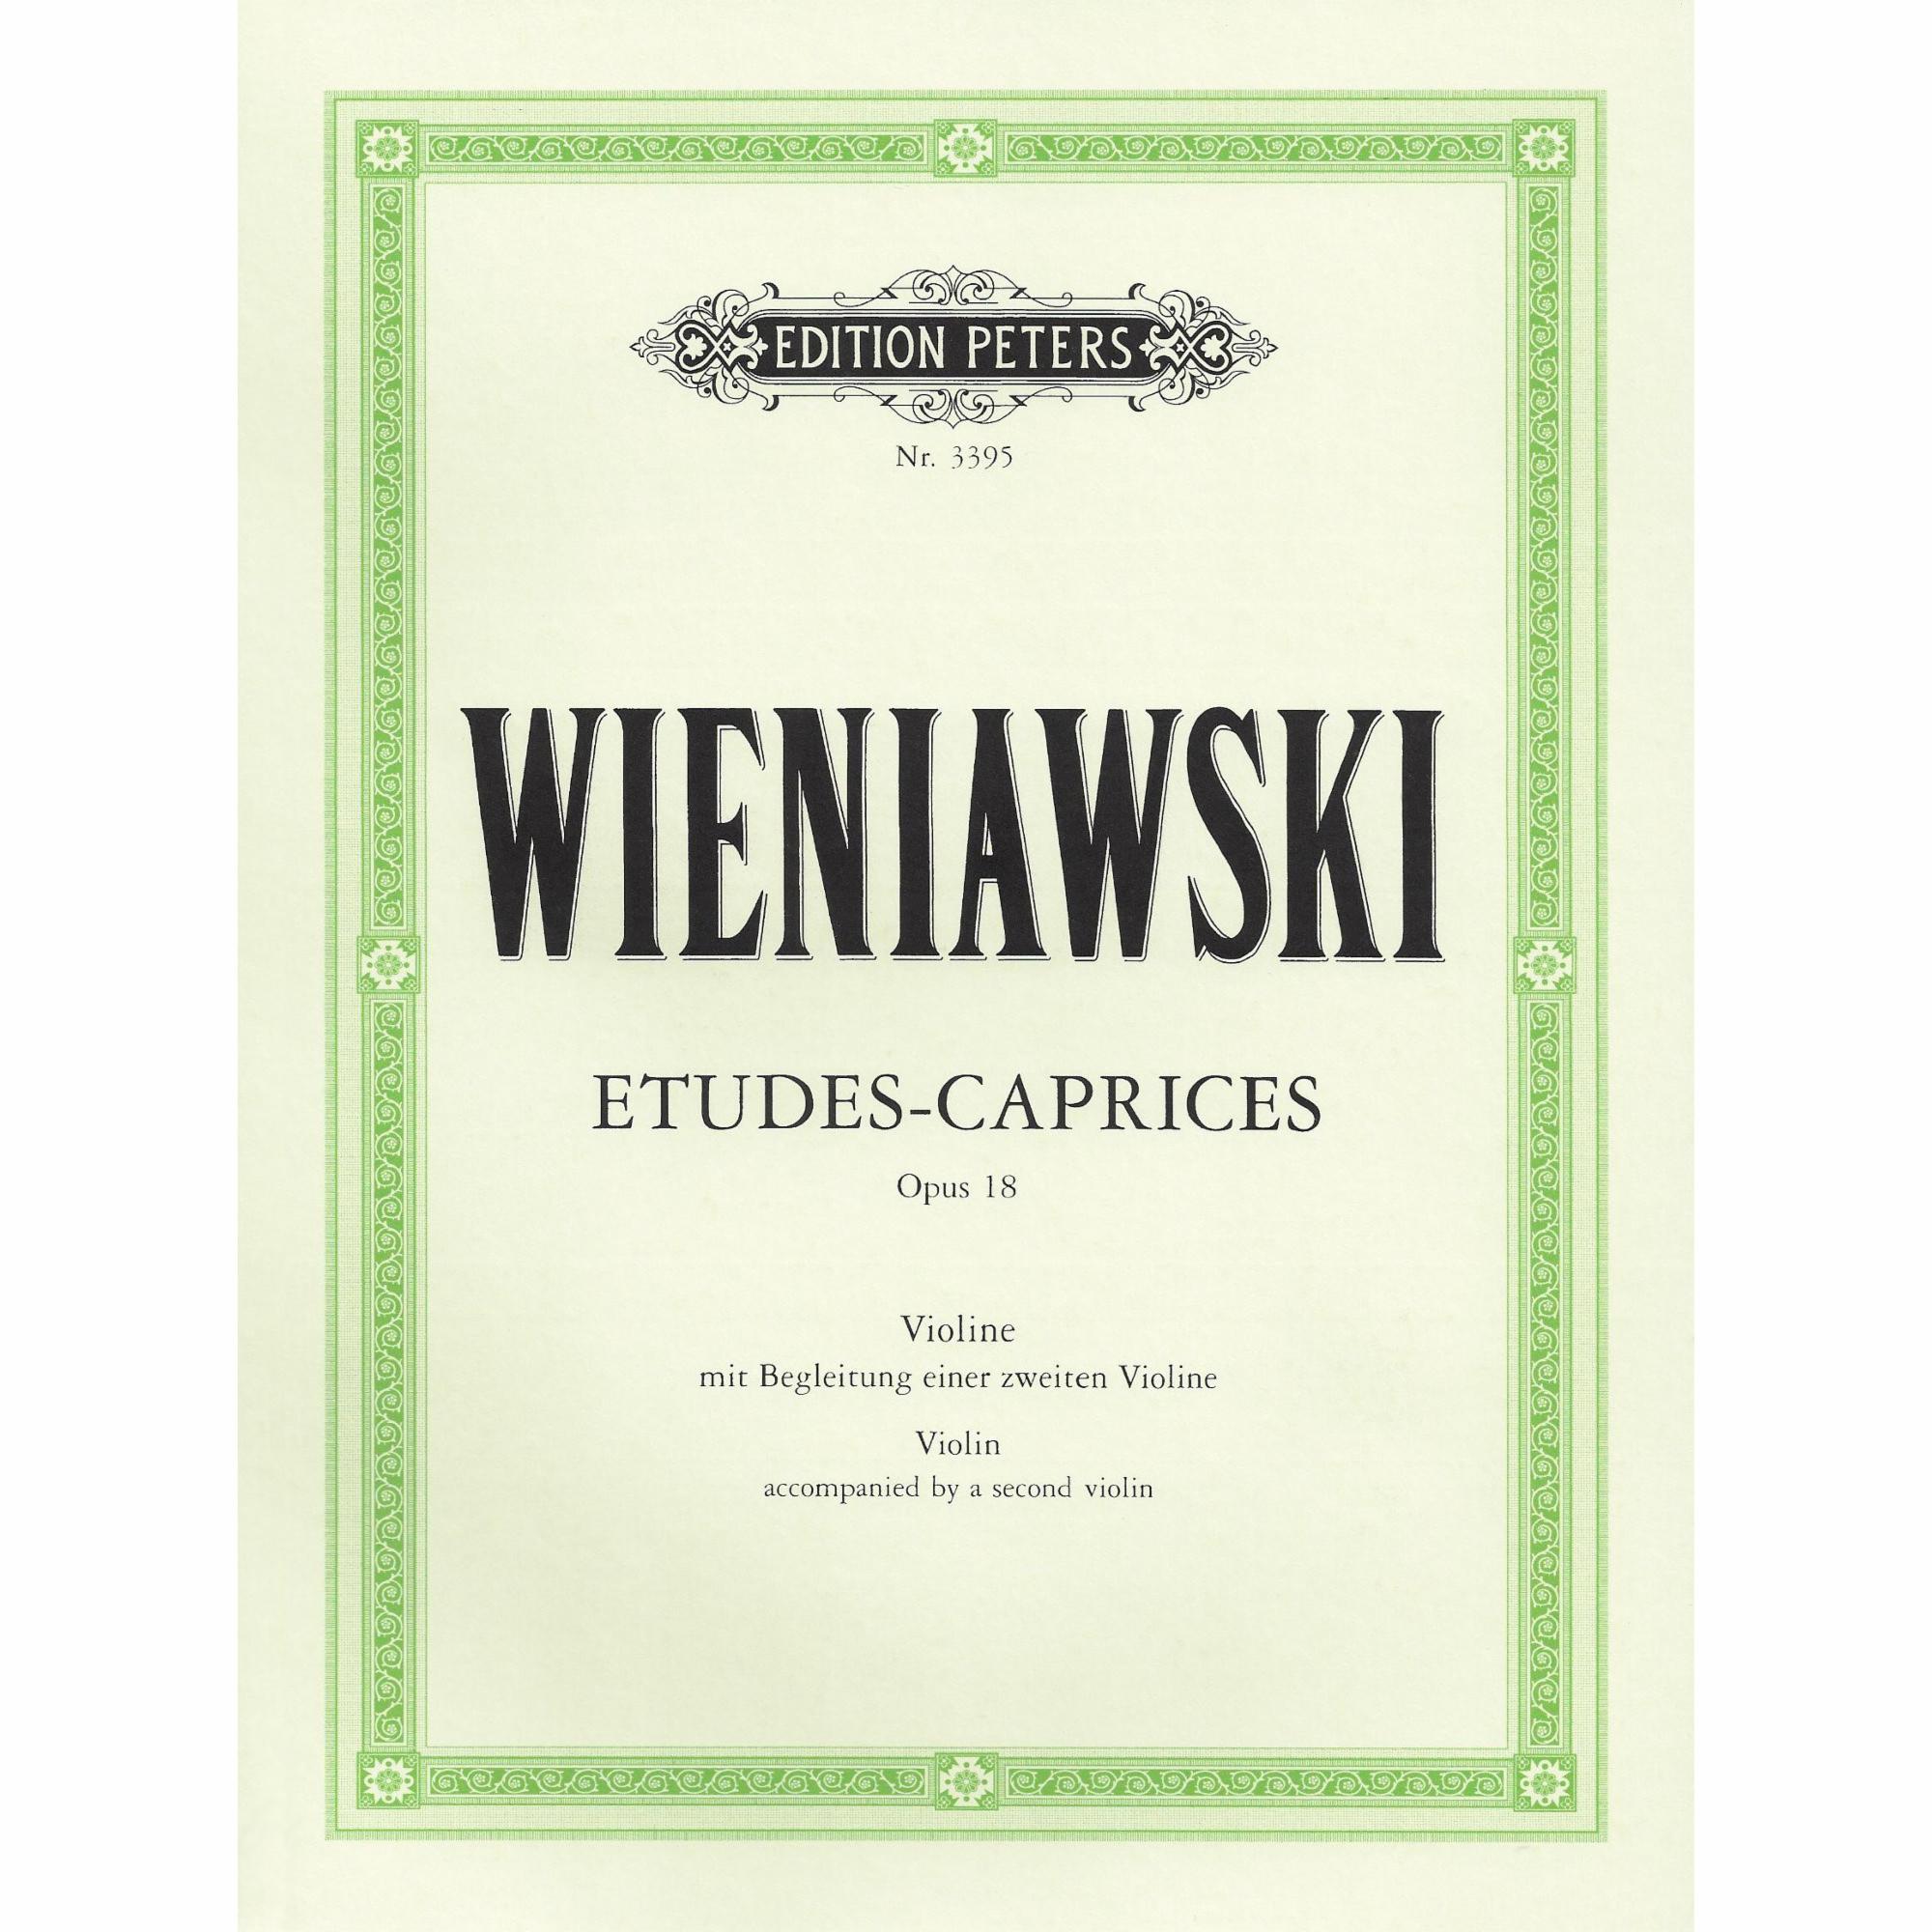 Wieniawski -- Etudes-Caprices, Op. 18 for Two Violins